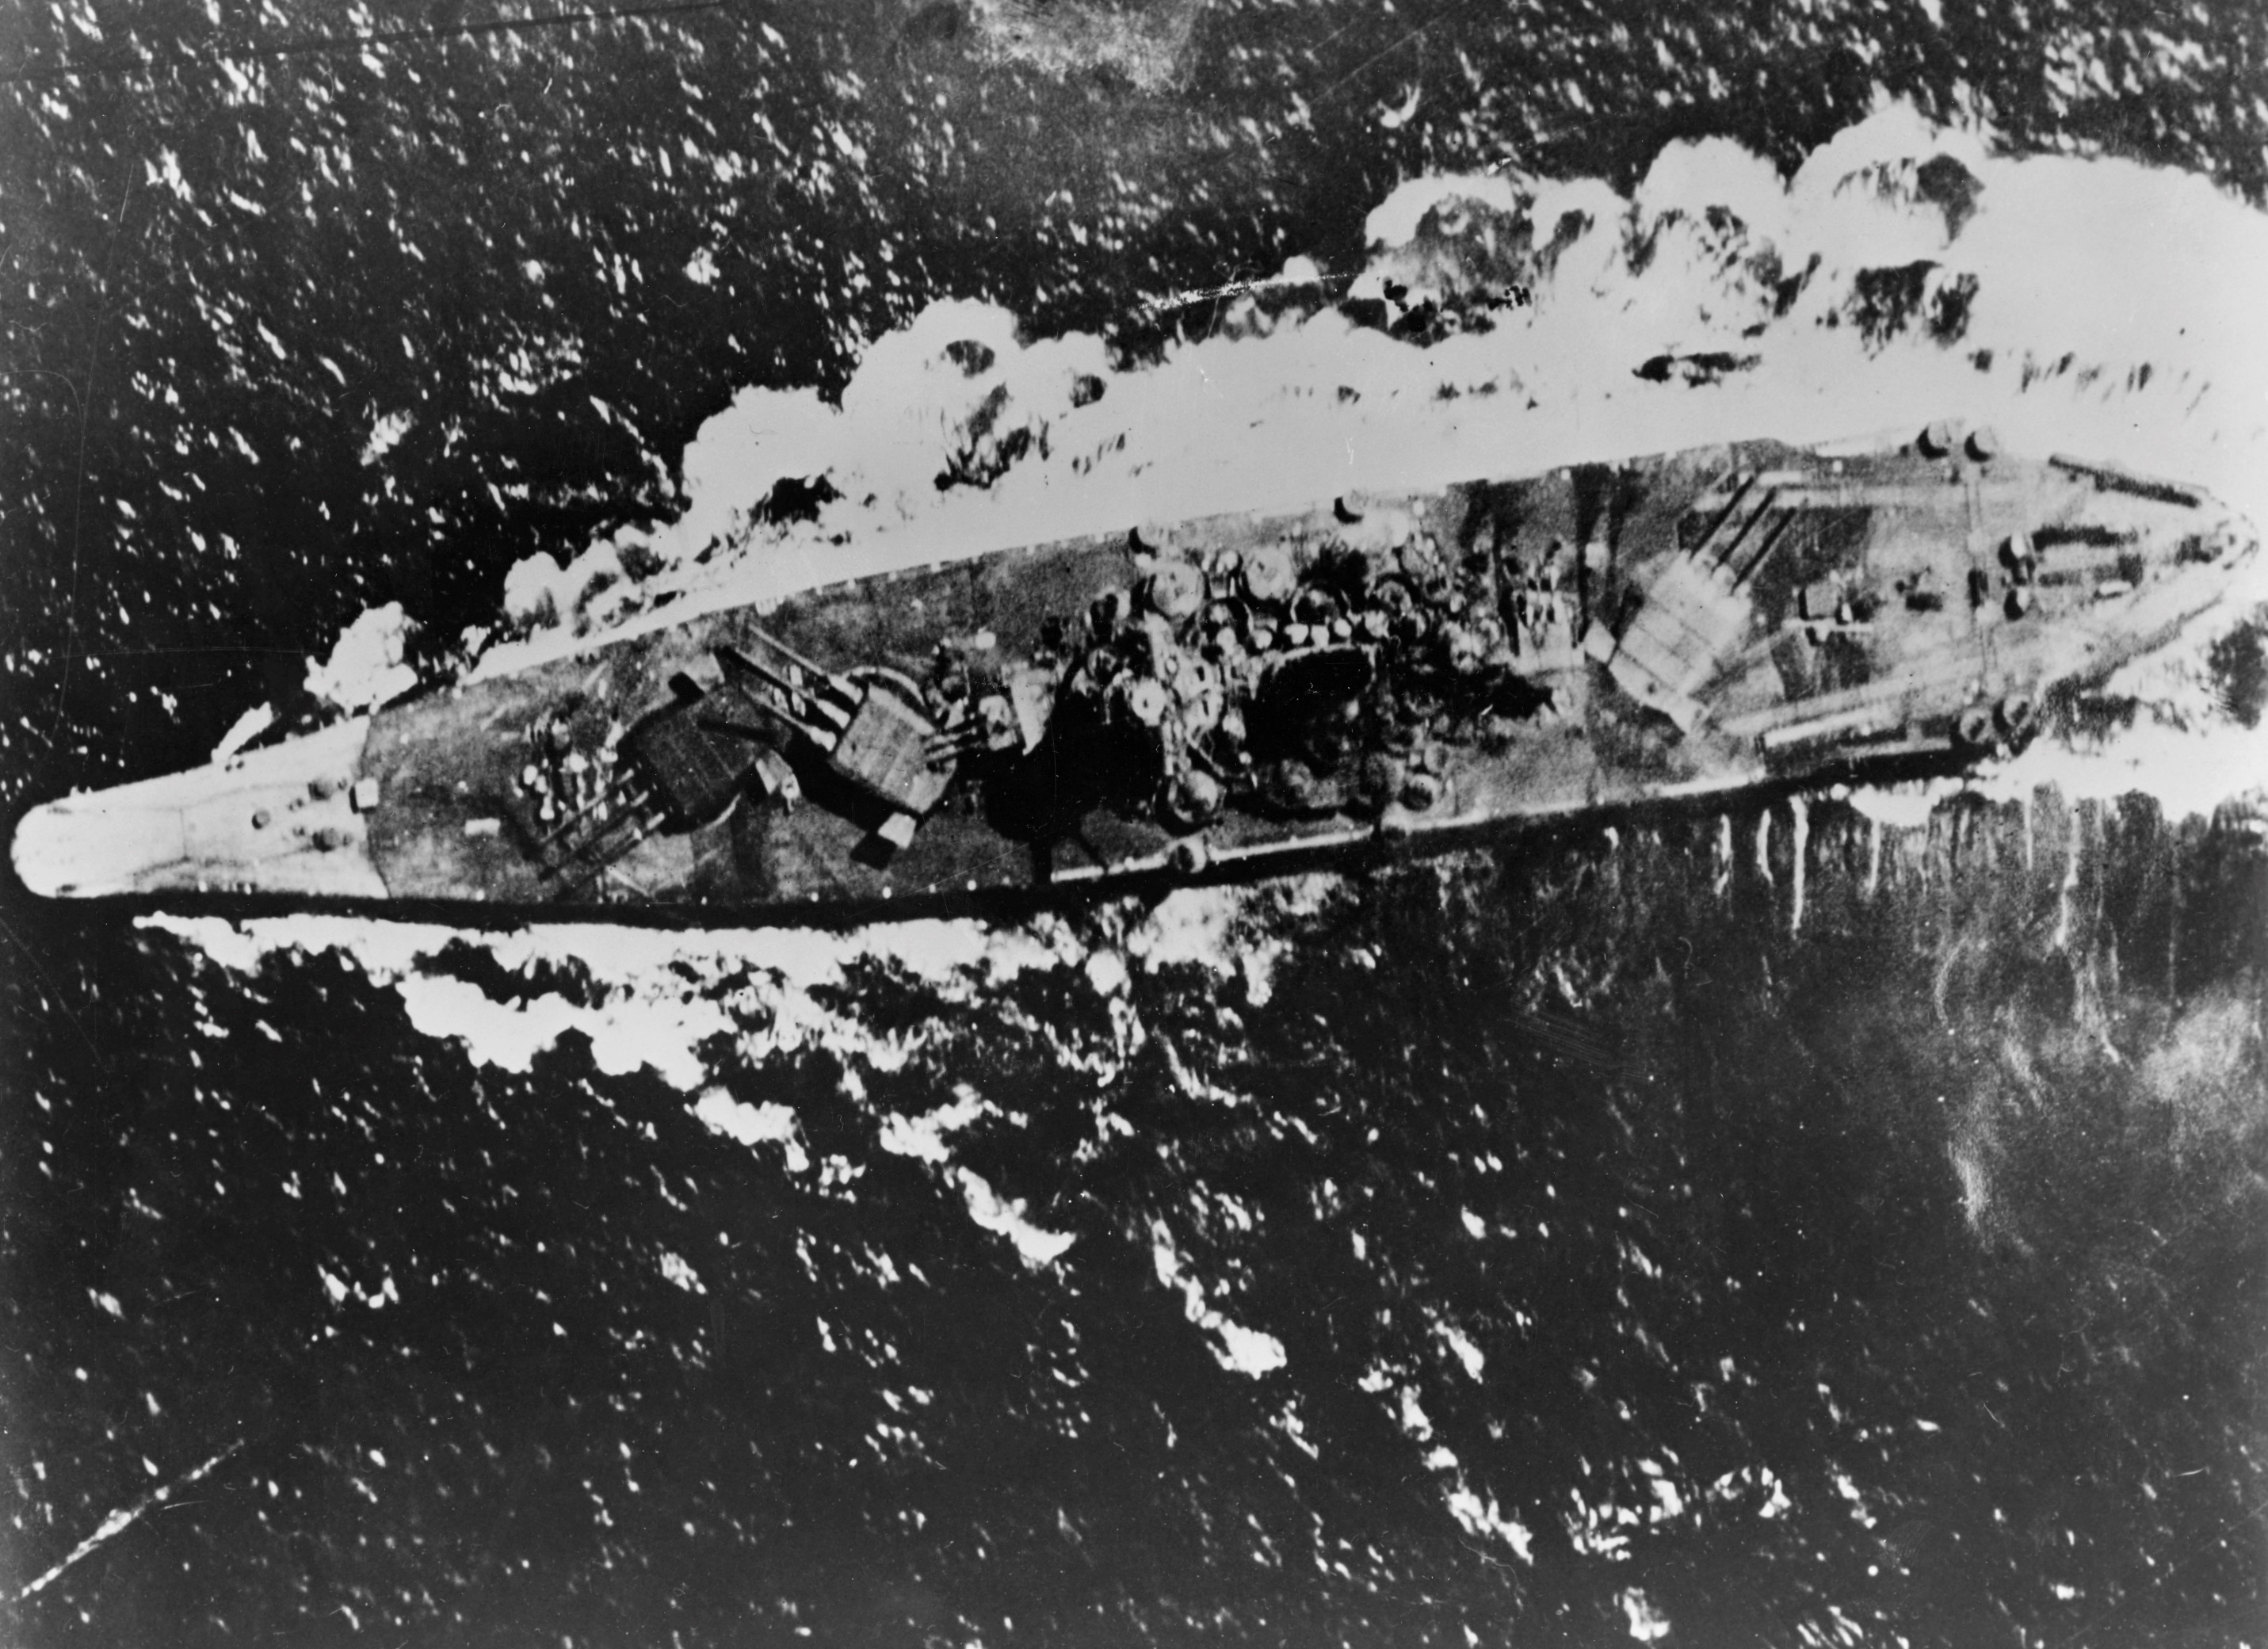 Yamato in action in the Sibuyan Sea, 24 Oct 1944, photo 1 of 2